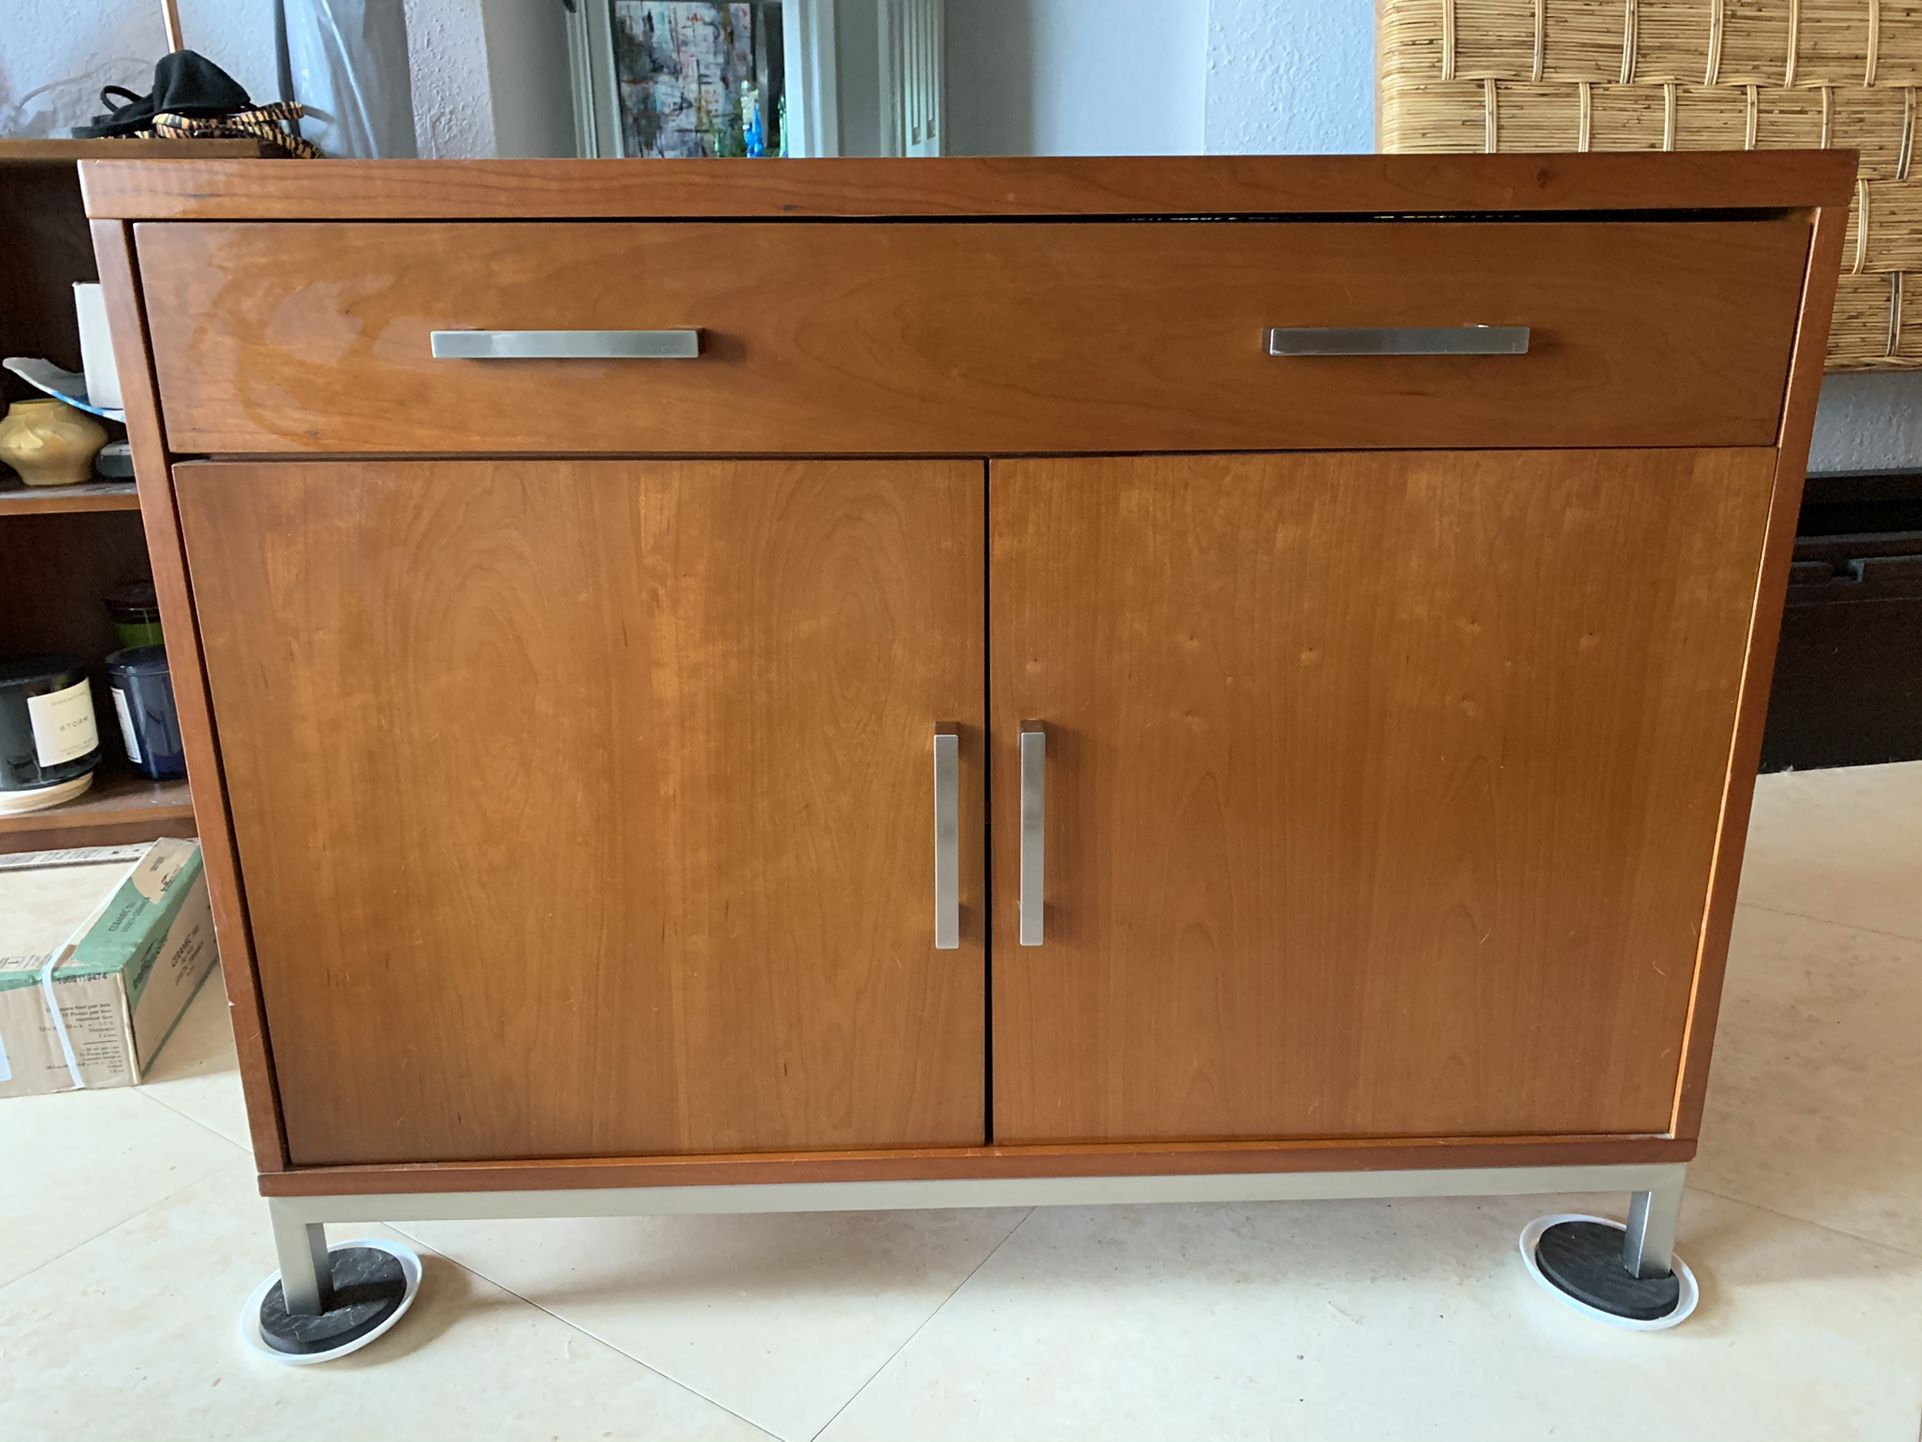 MCM Mid-Century Inspired Cabinet West Elm, Crate and Barrel, Pottery Barn